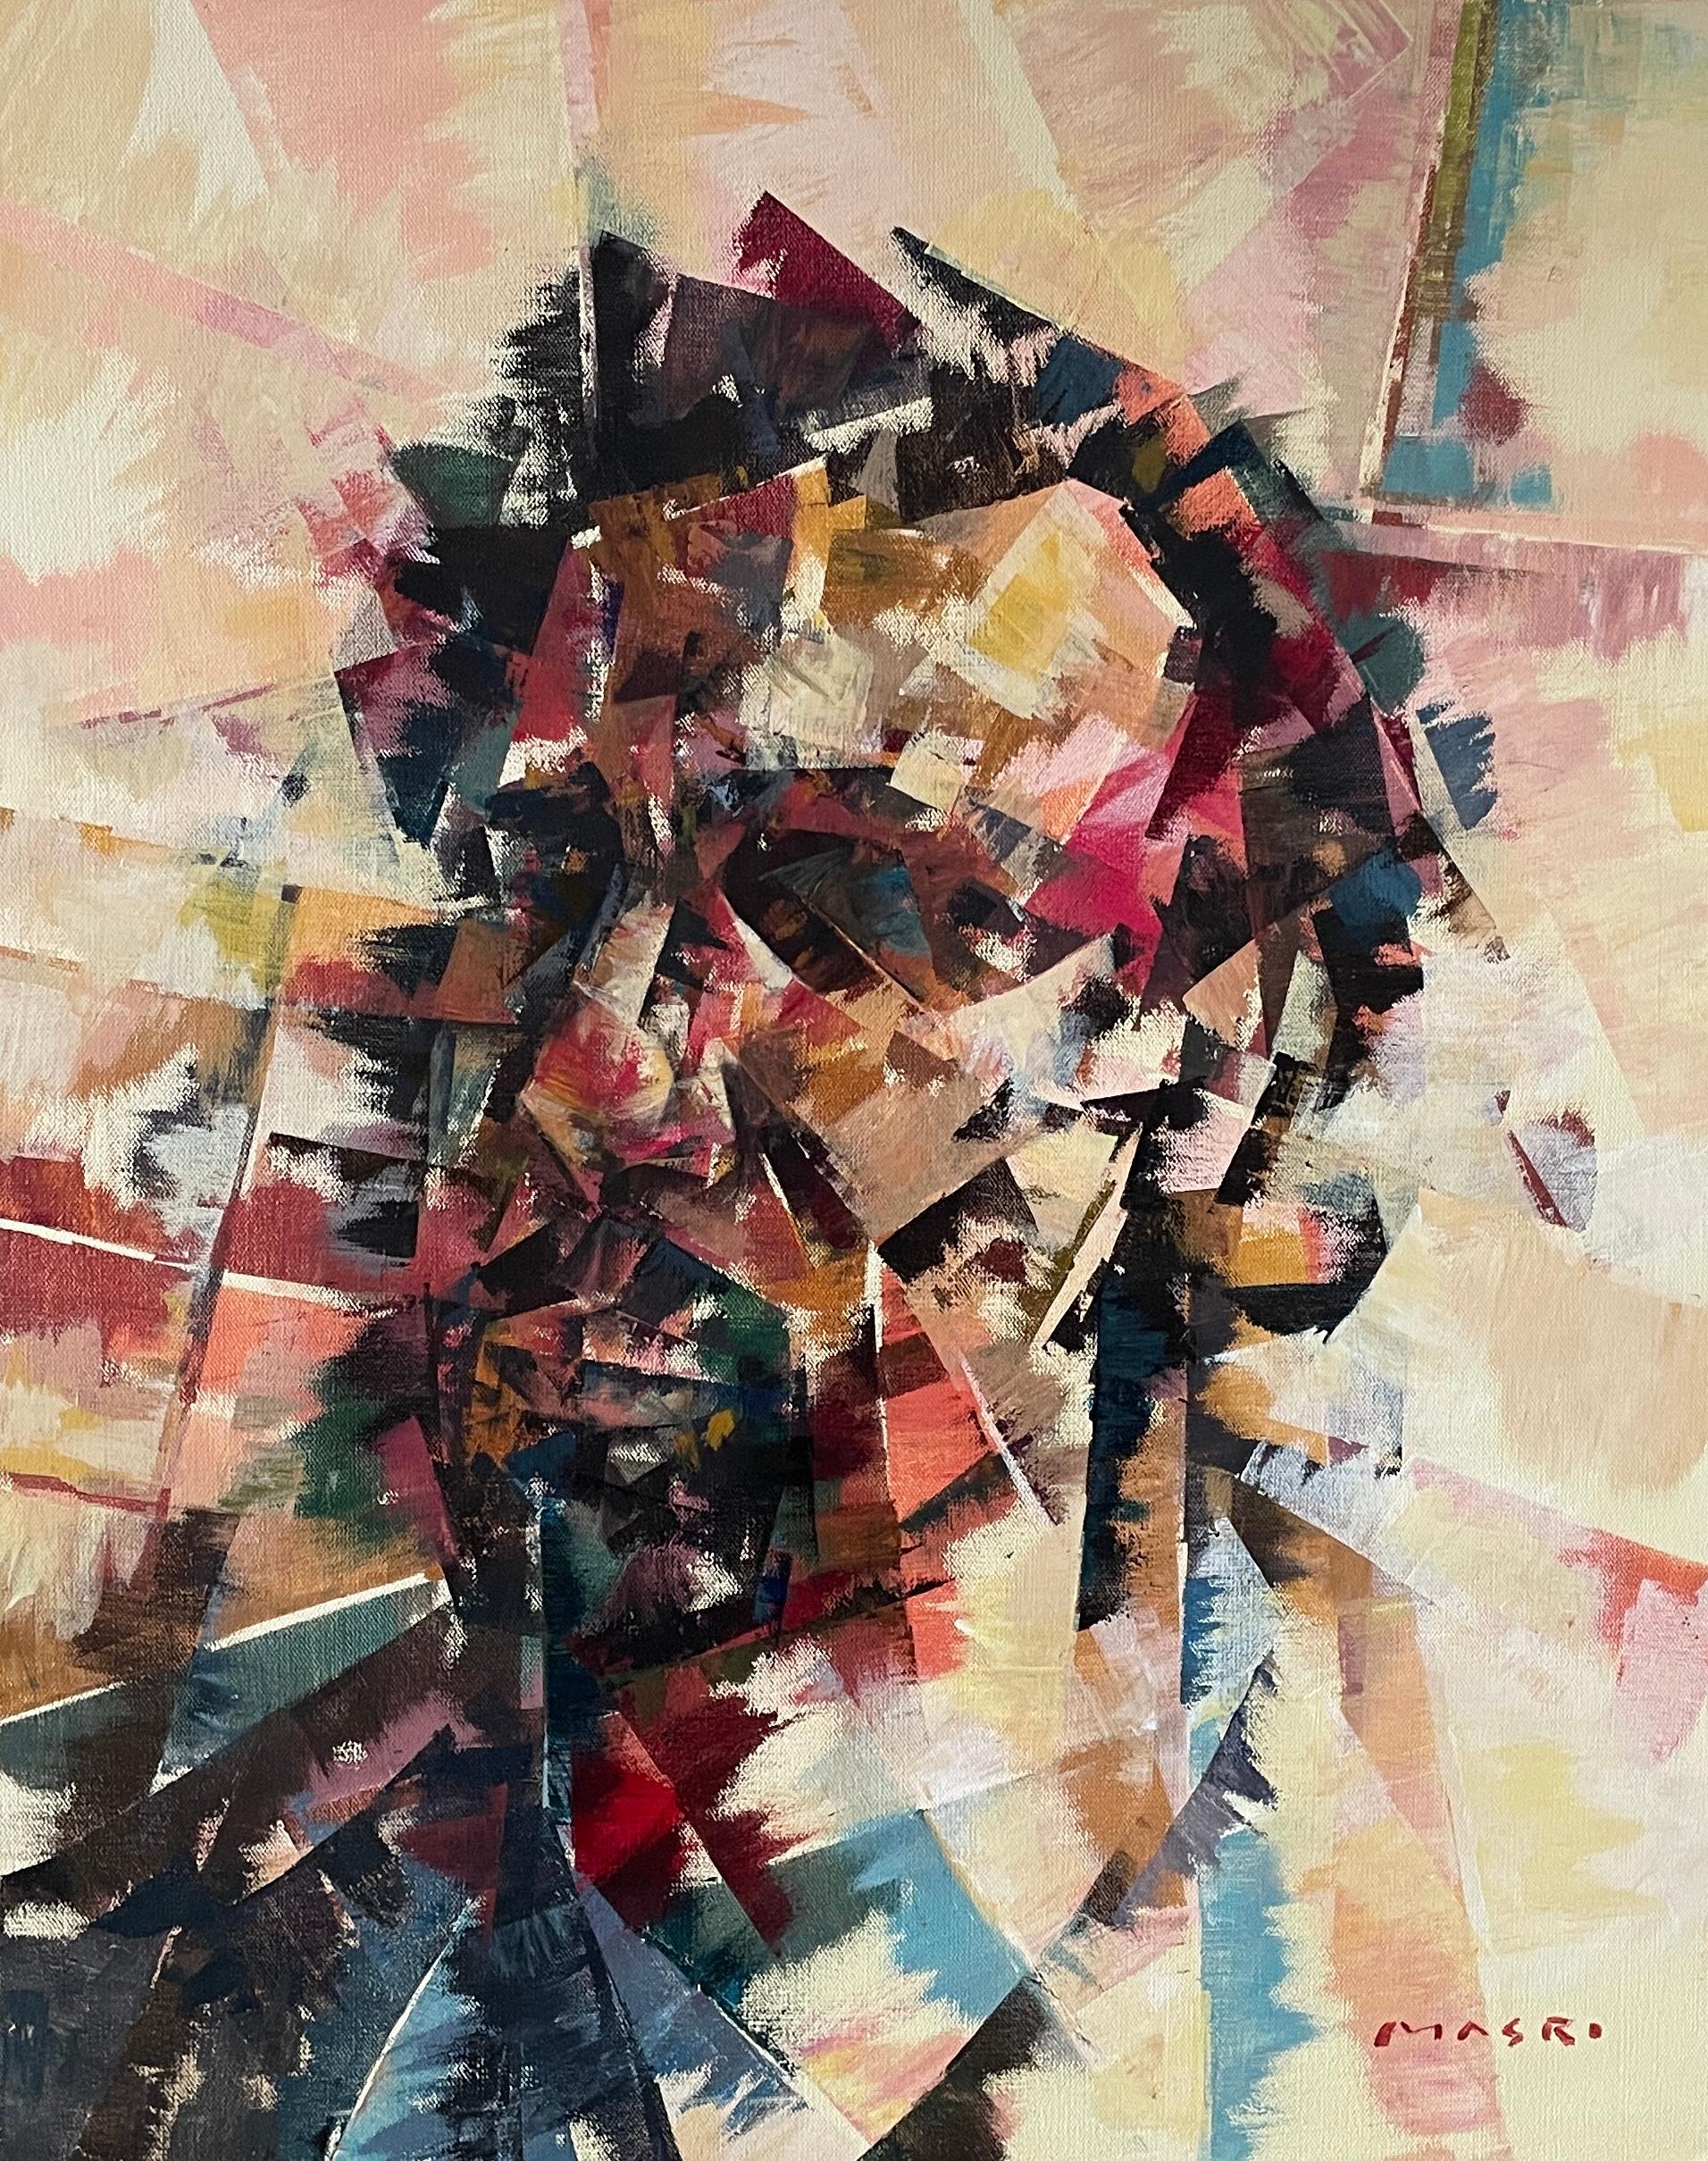 Masri Hayssam Abstract Painting - "Shattered Mind" Mixed Media Abstract Expressionist Cubism Male Portrait